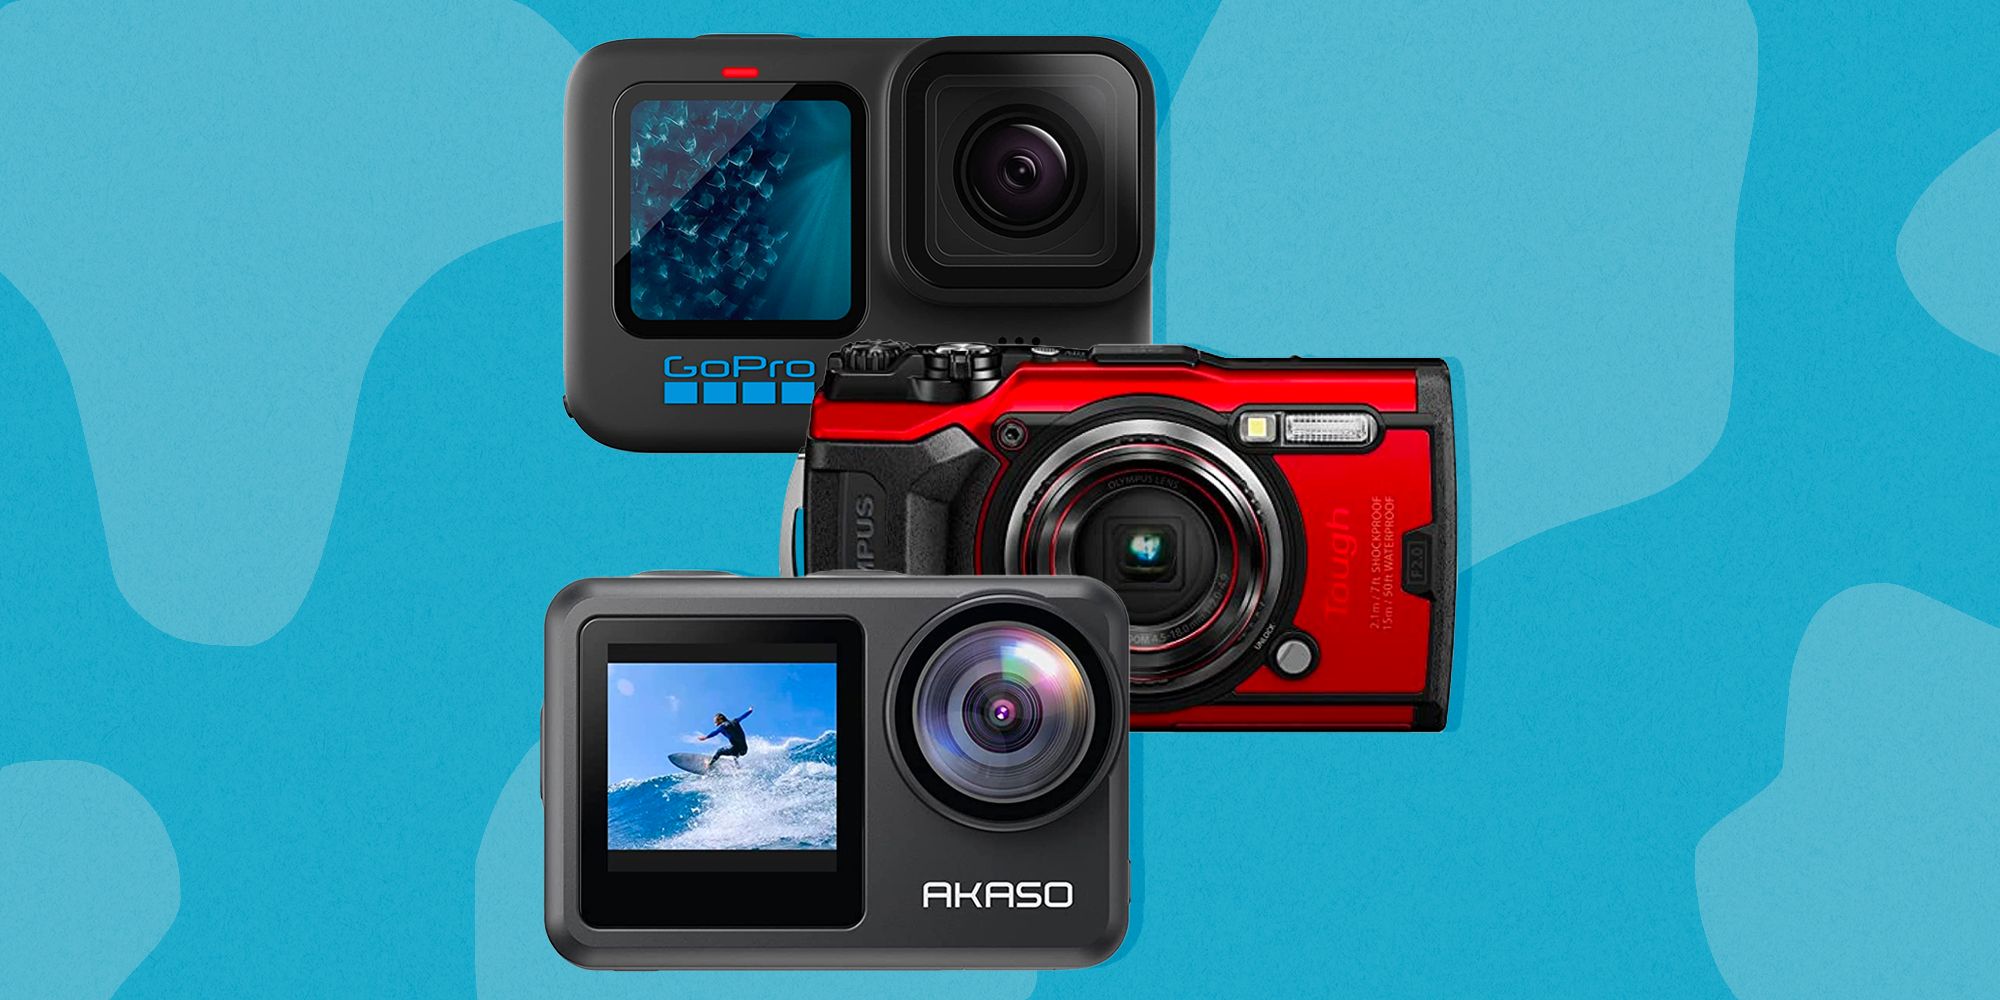 Land at straffe Optø, optø, frost tø 5 Best Action Cameras of 2023 - Action Video Camera Reviews